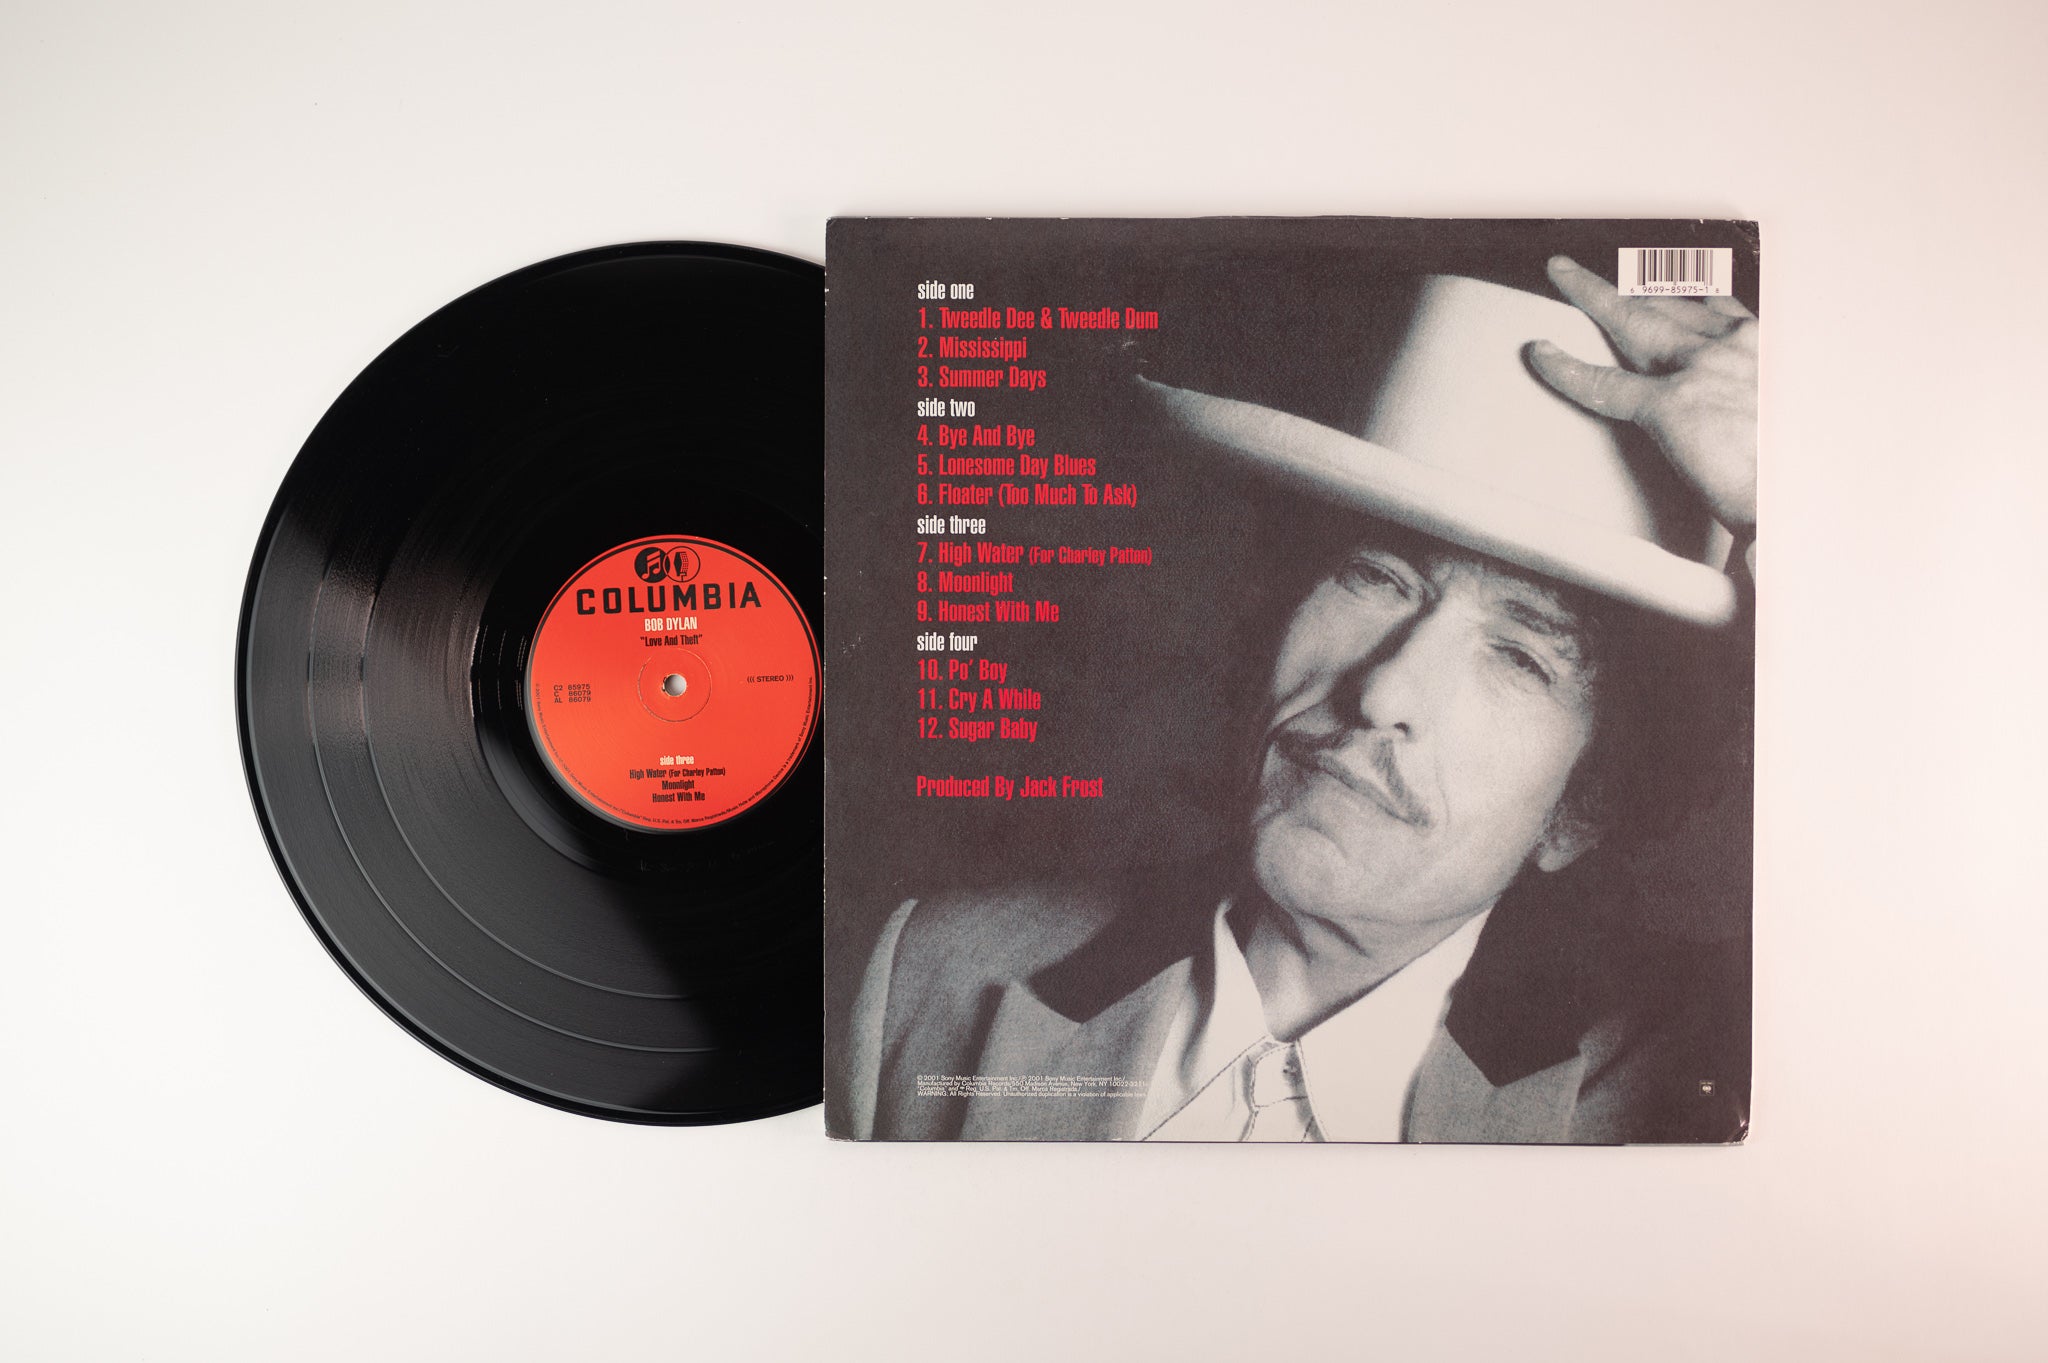 Bob Dylan - "Love And Theft" on Columbia